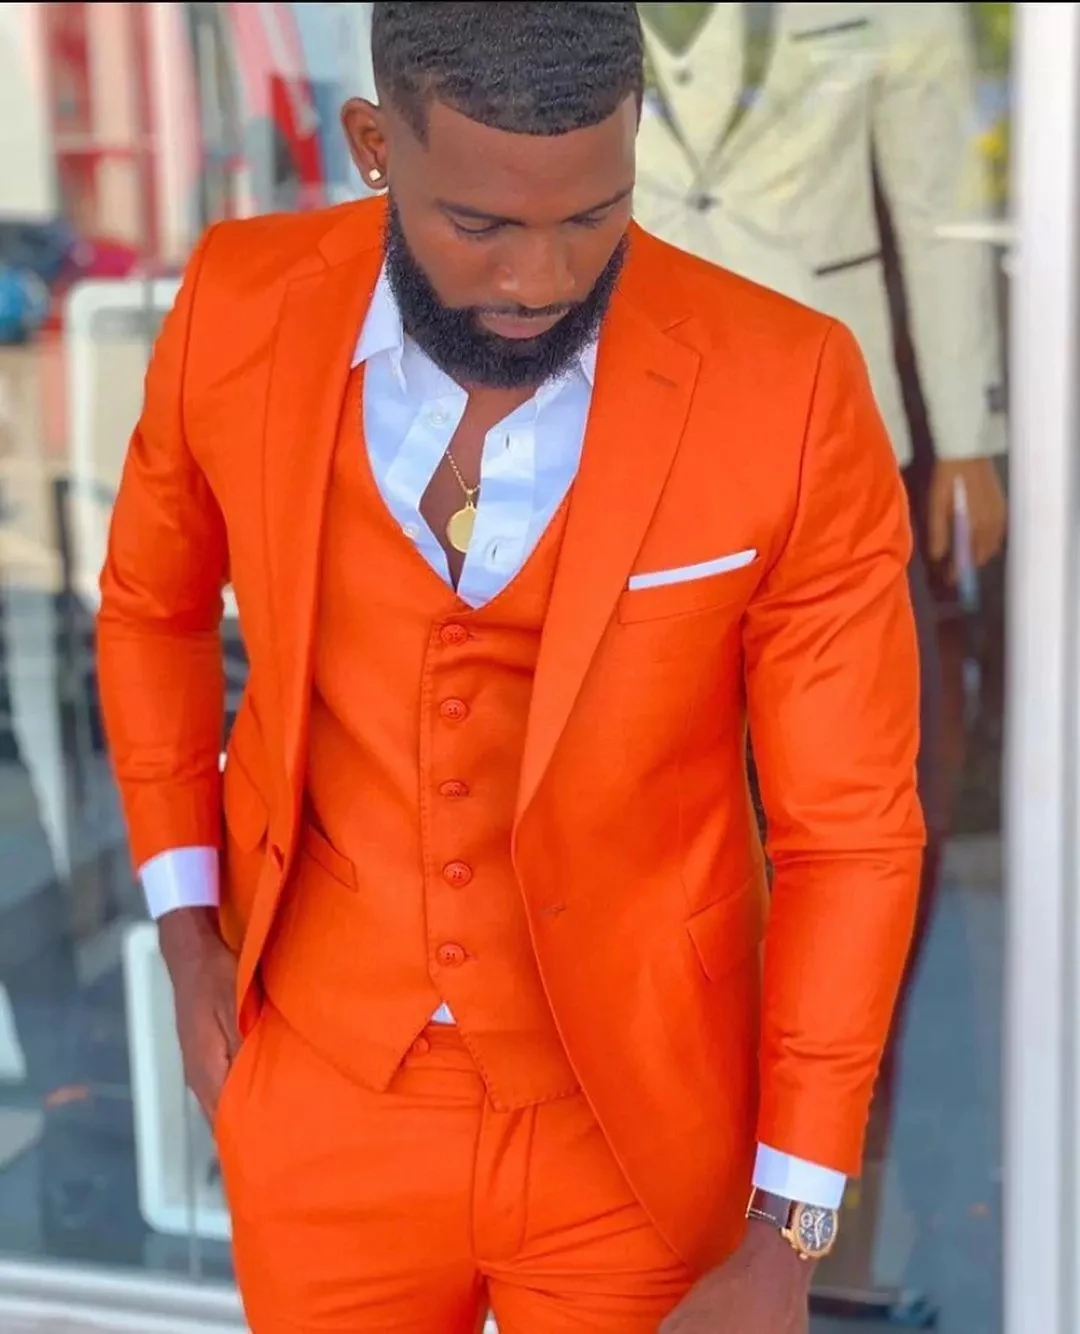 

Bright Orange Notch Lapel Men Suits Costume Homme Wedding Dress Tuxedos Terno Masculino Slim Fit Groom Prom Party Blazer 3 Pcs, Same as picture/custom made